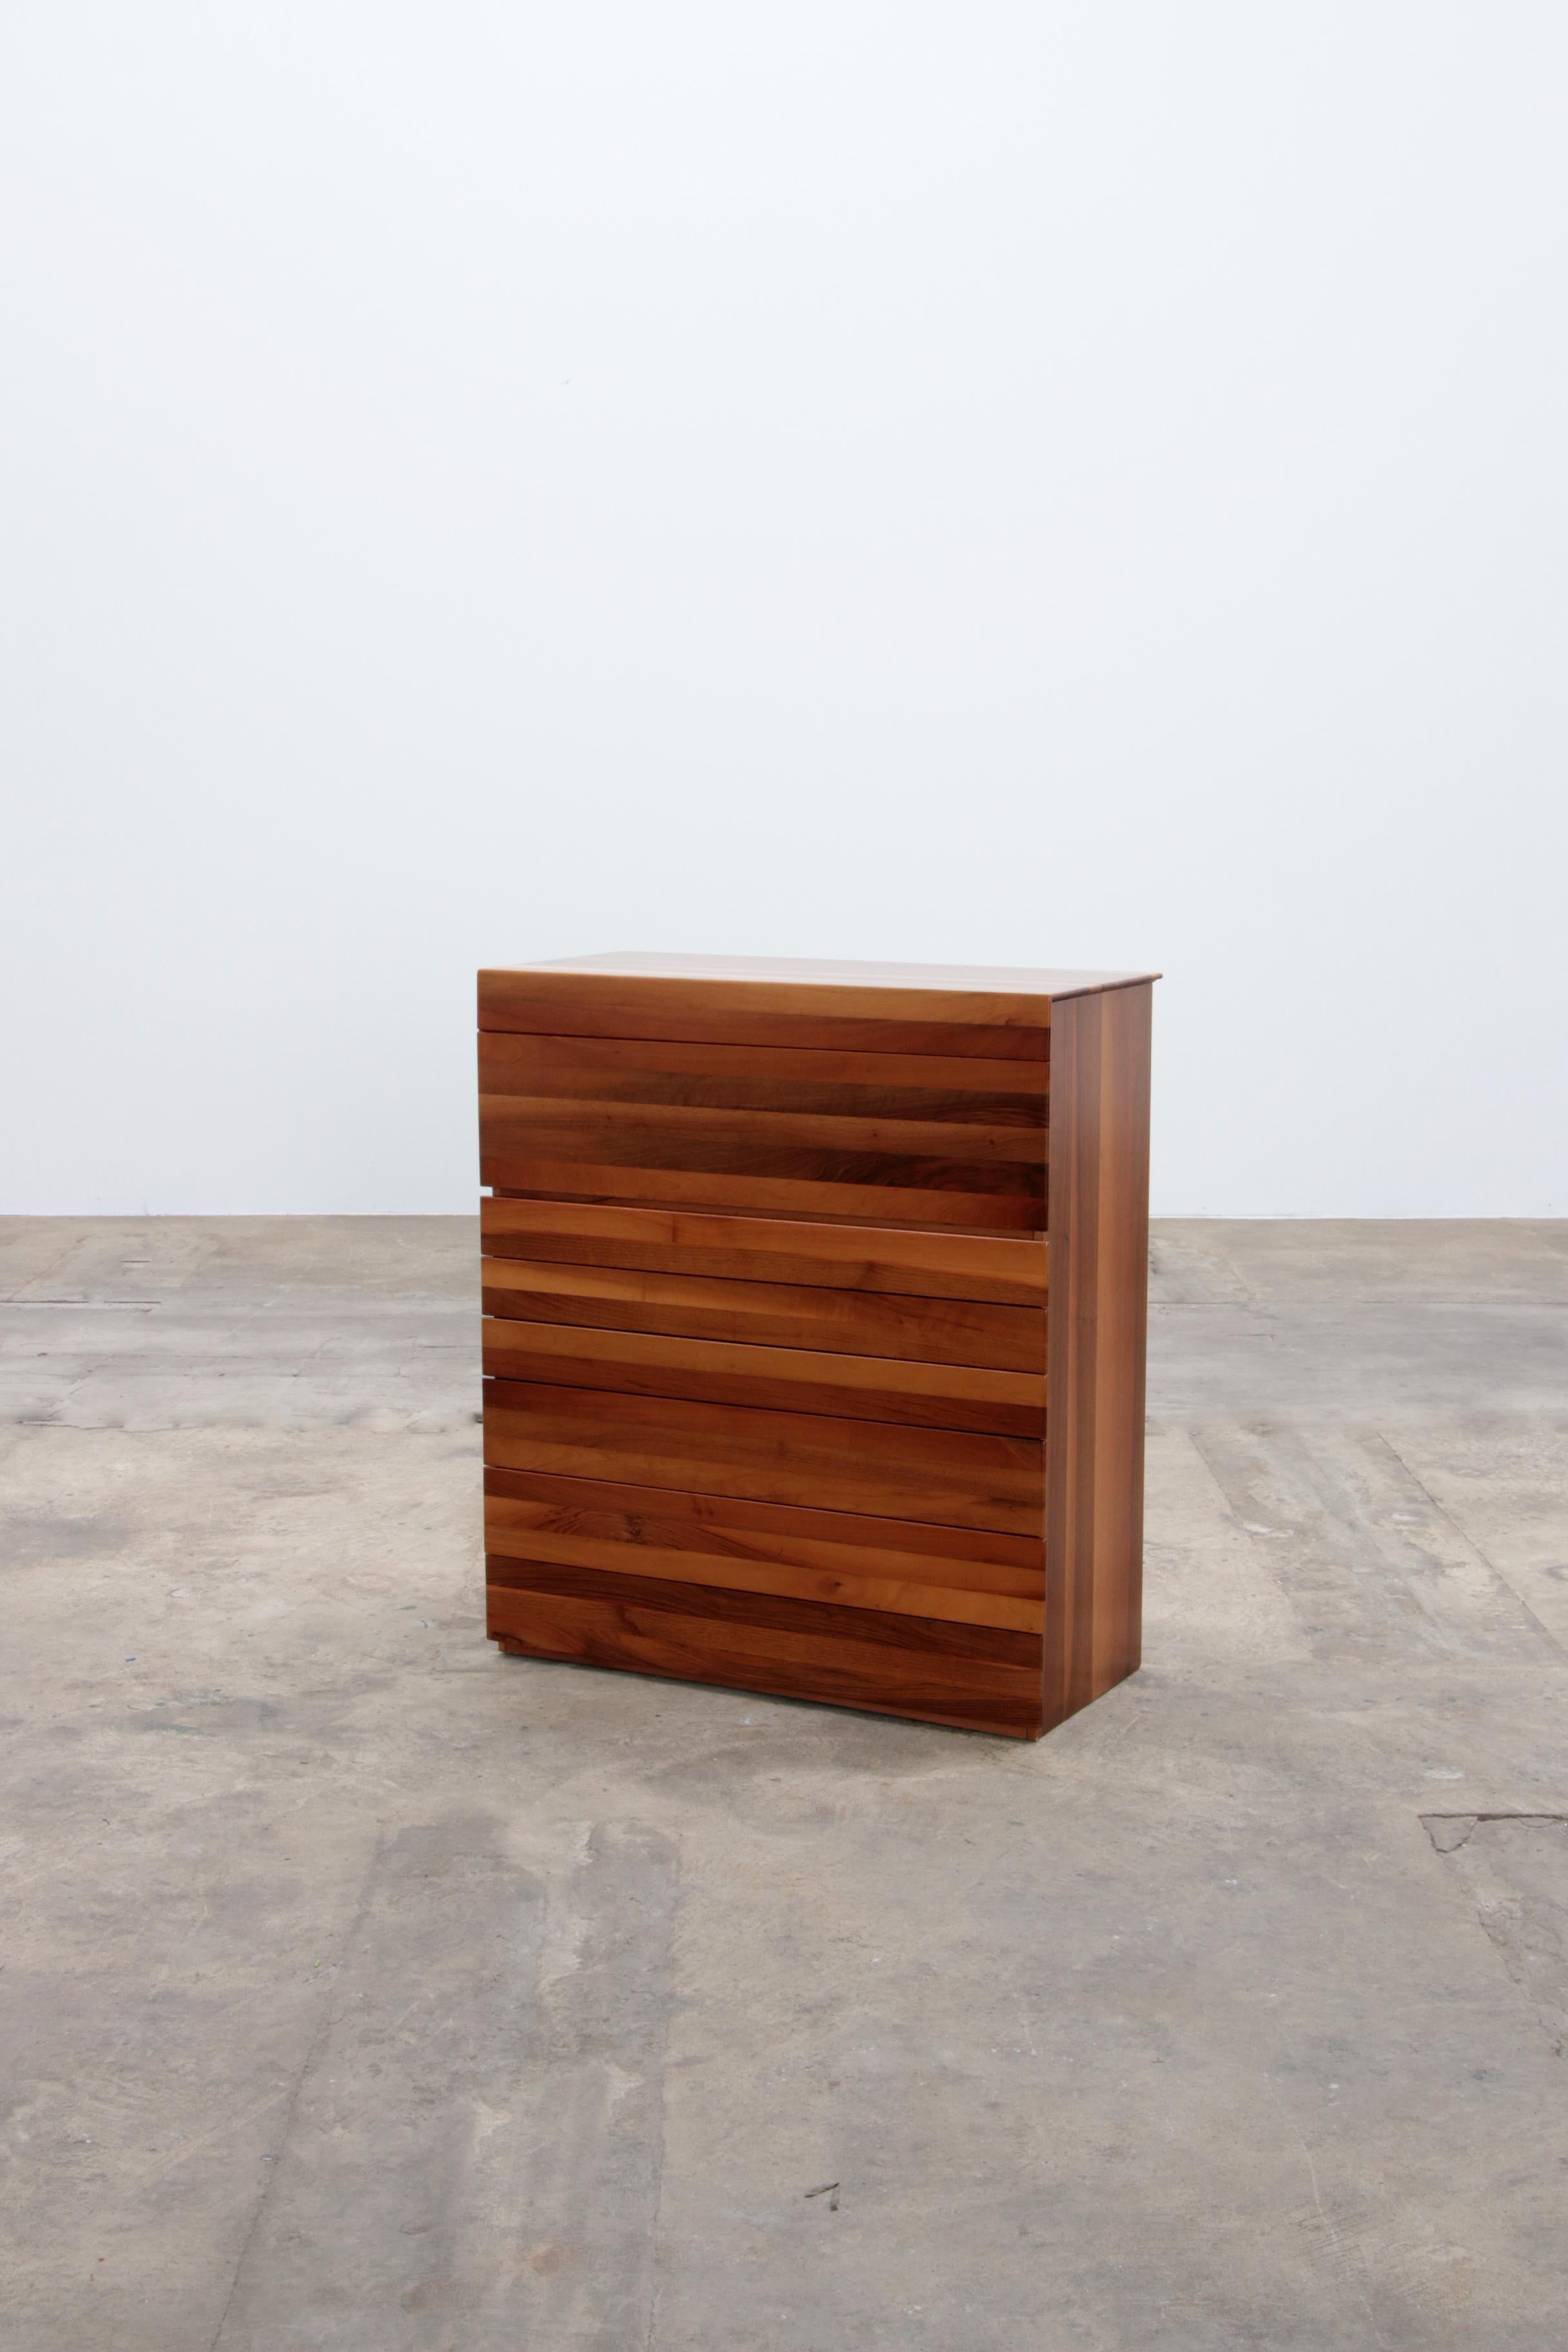 Afra and Tobia Scarpa for Molteni, walnut, wood, Italy, 1970. This well-designed chest of drawers/secretaire has a modern and clean aesthetic based on a solid construction executed in only honest, wooden materials. The designer duo eliminated the